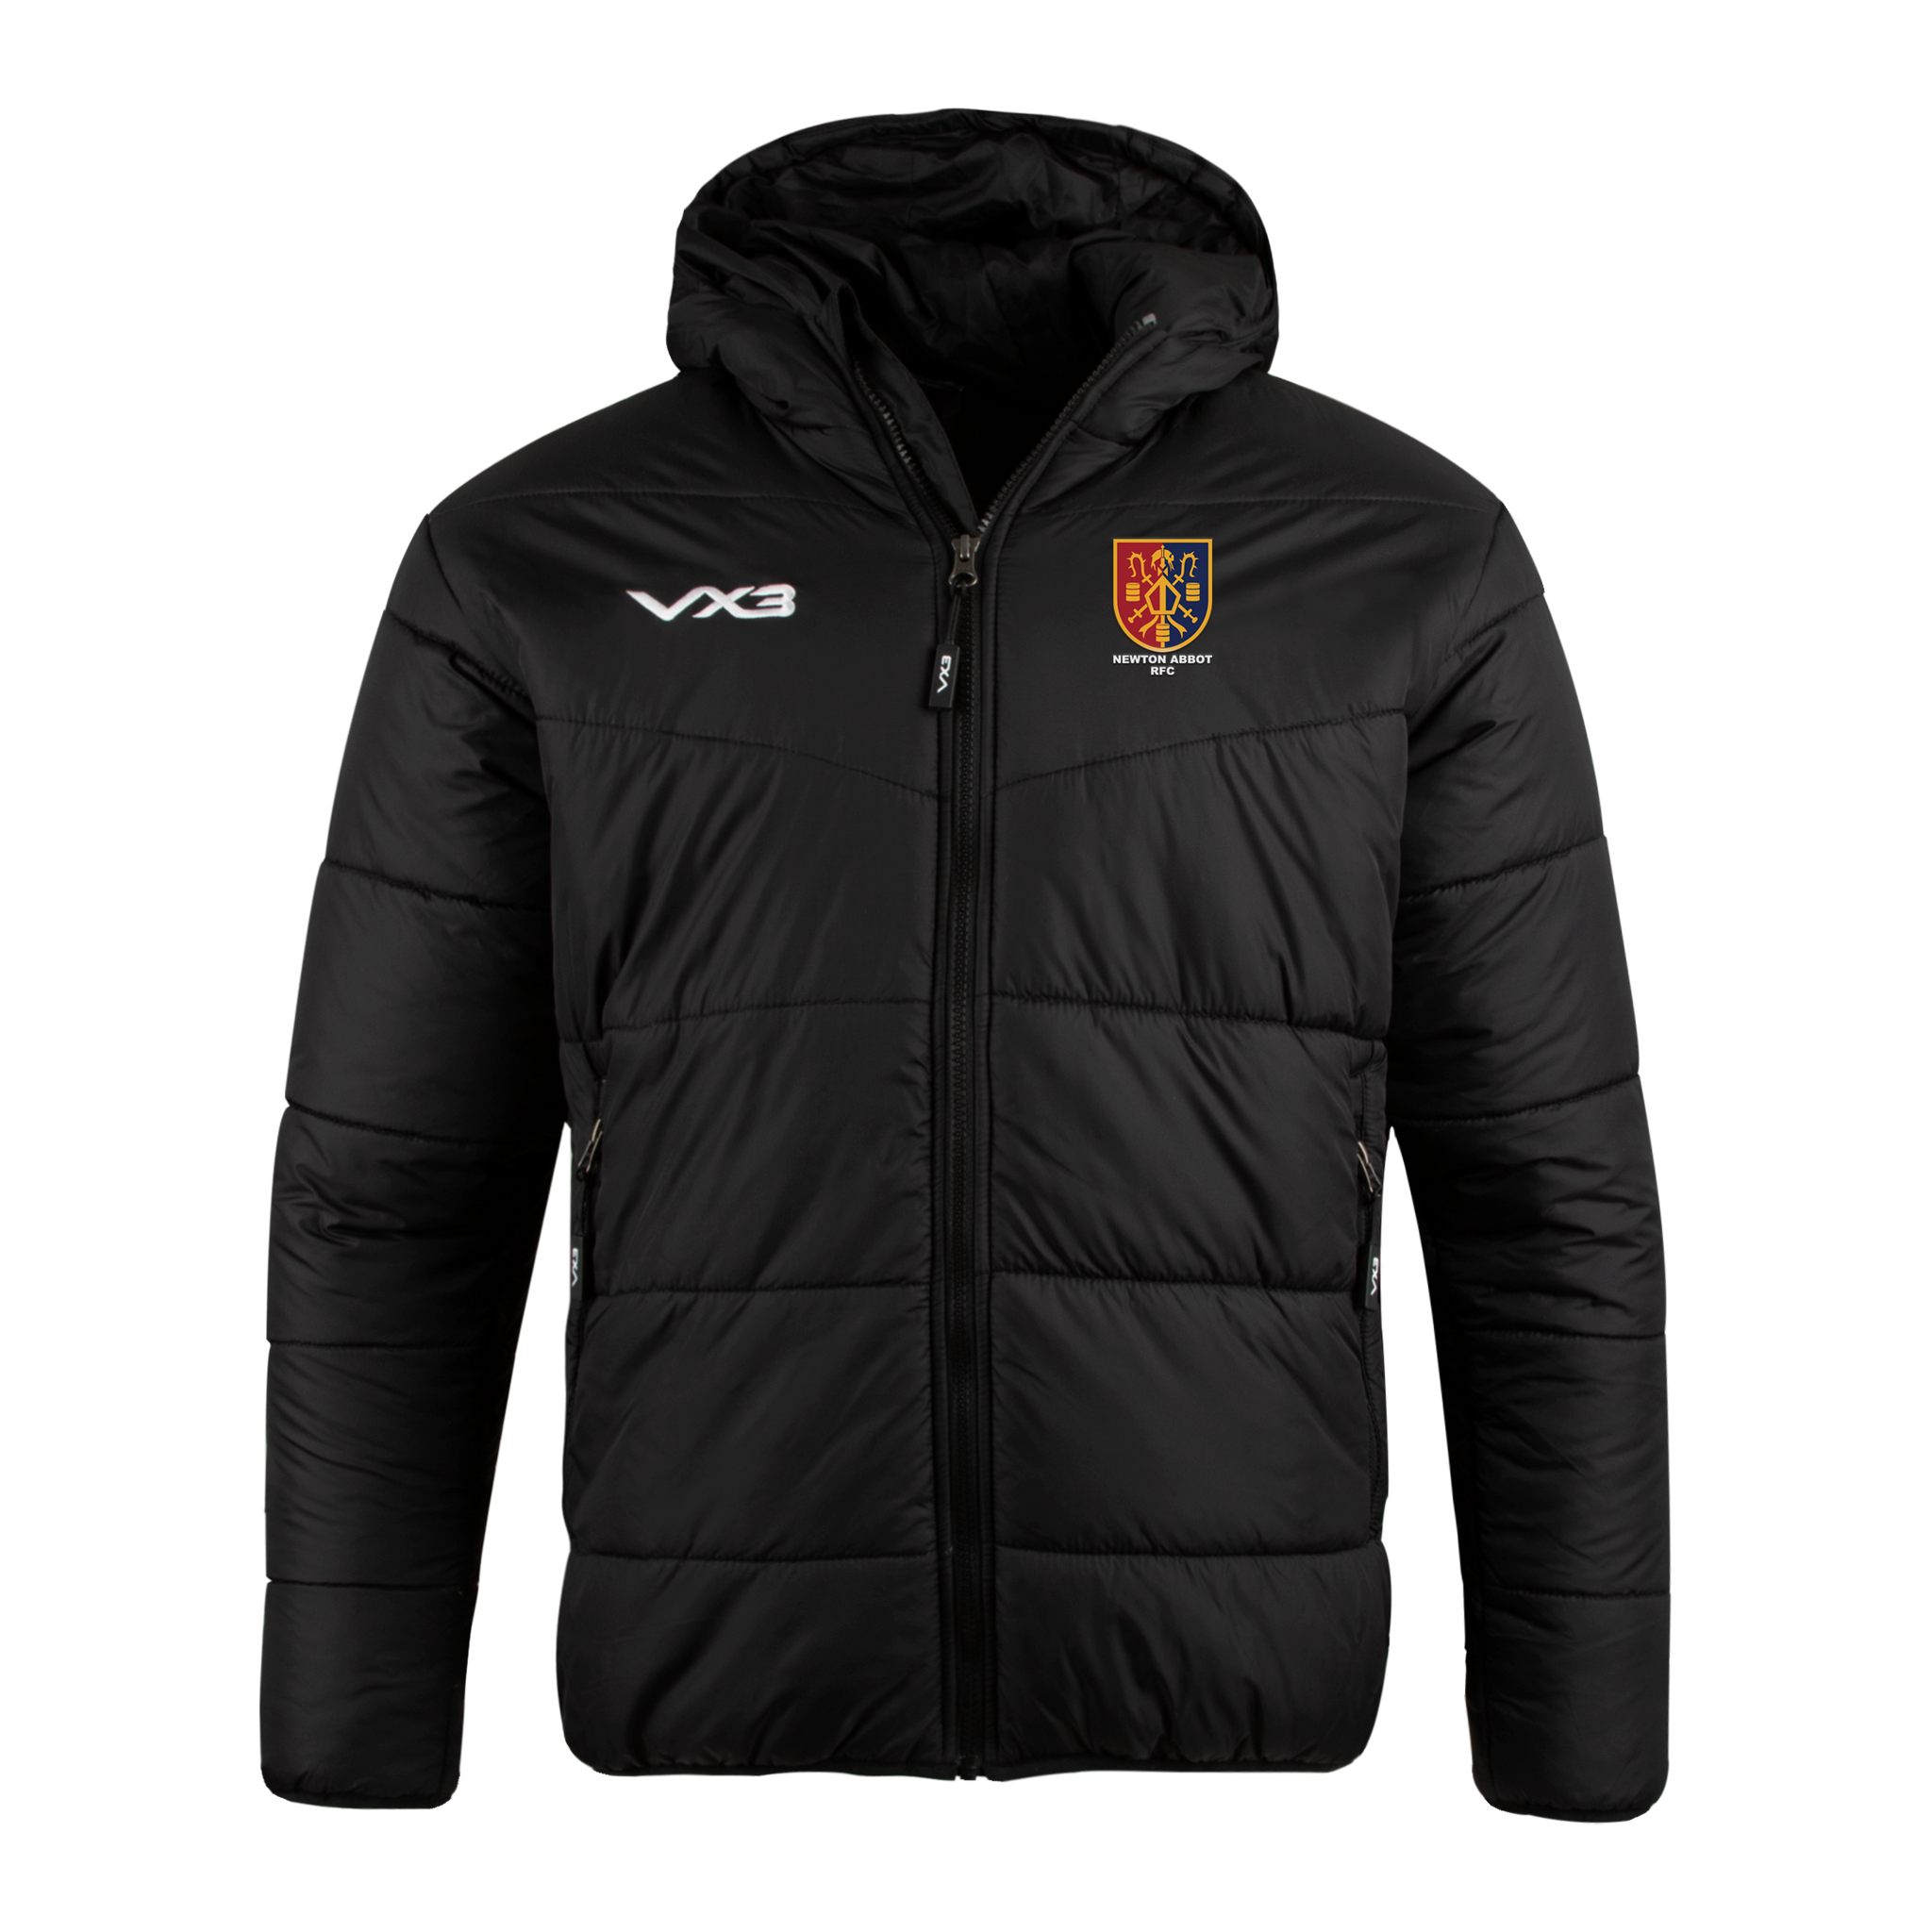 Newton Abbot Rugby Club Lorica Quilted Jacket